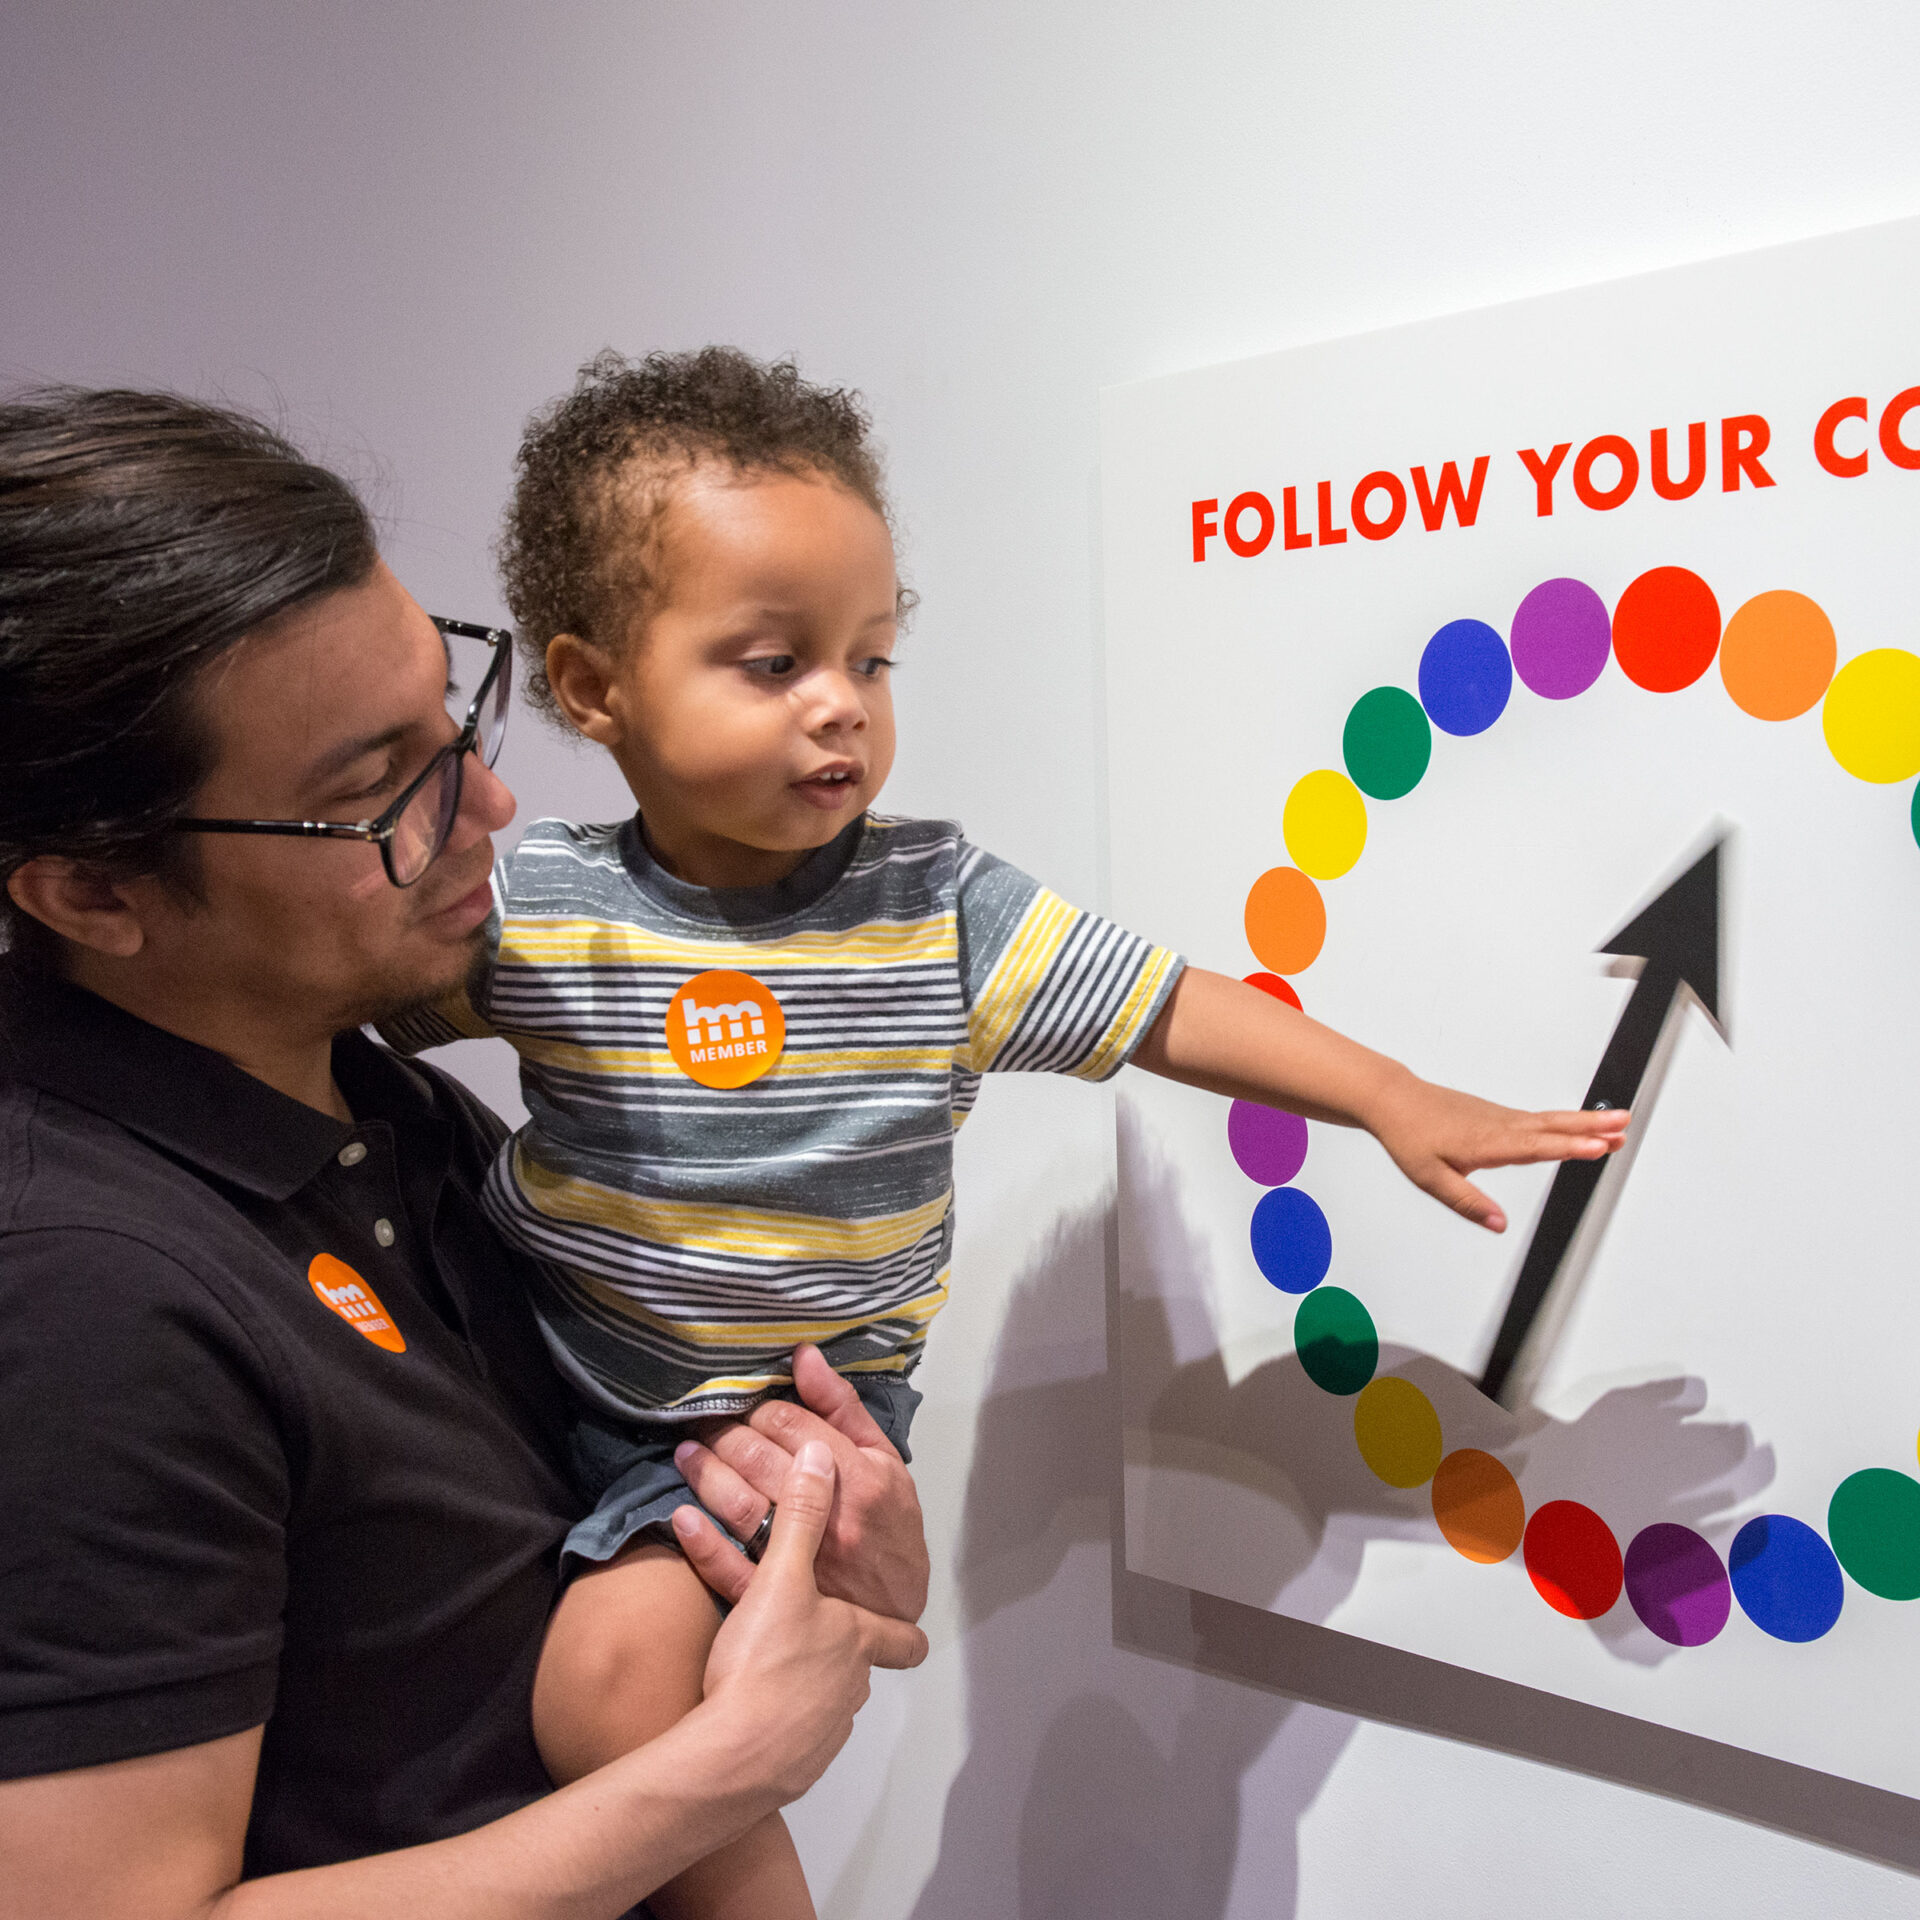 A man and a child looking at a sign that says follow your color.